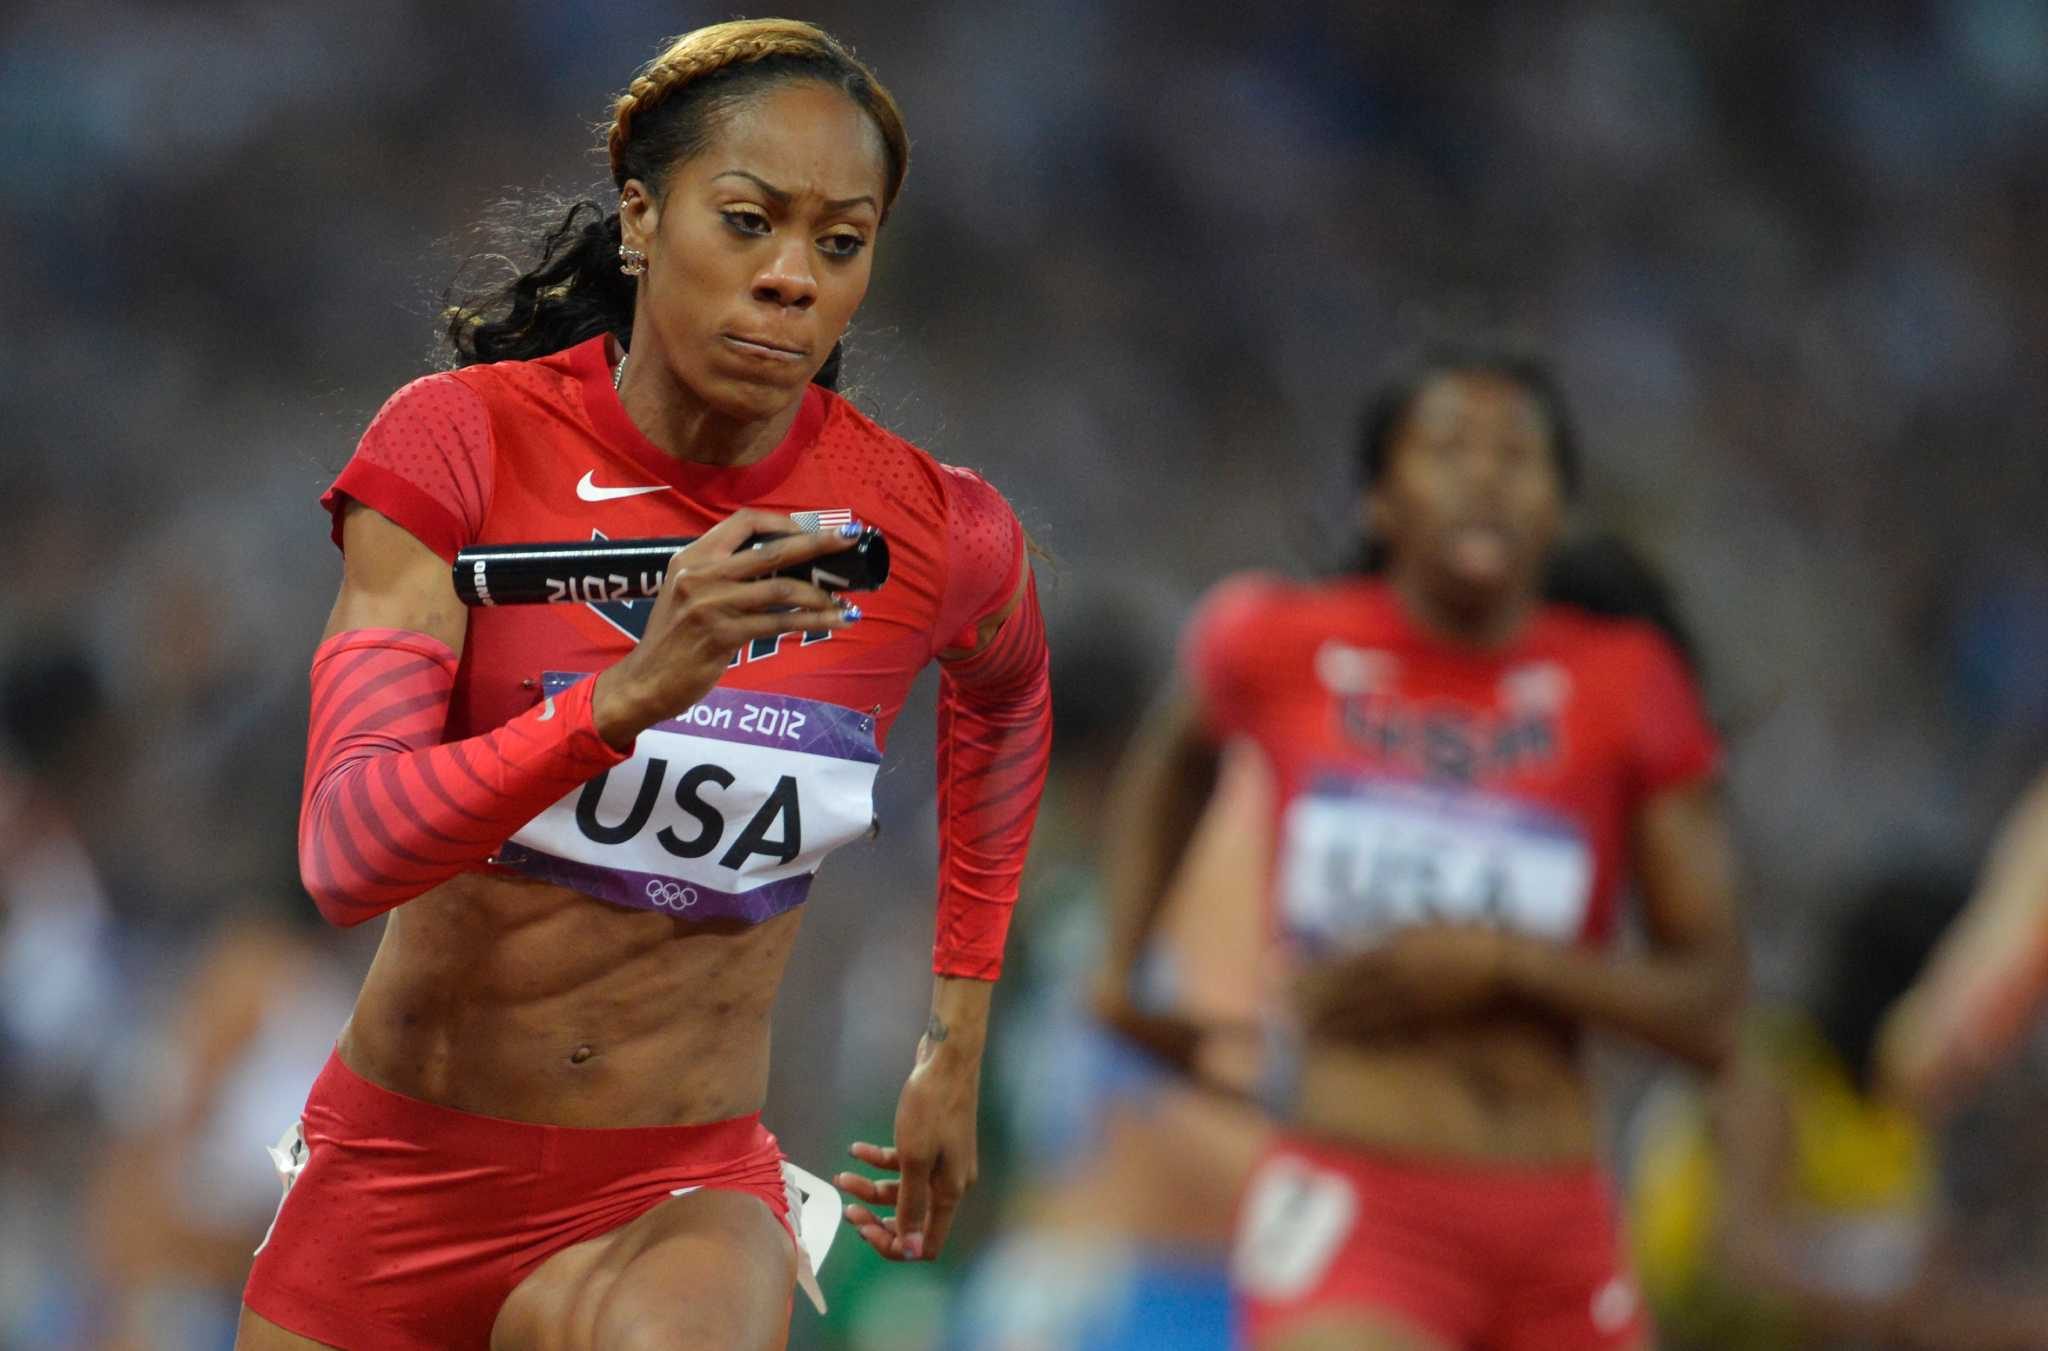 us-sanya-richards-ross-competes-in-the